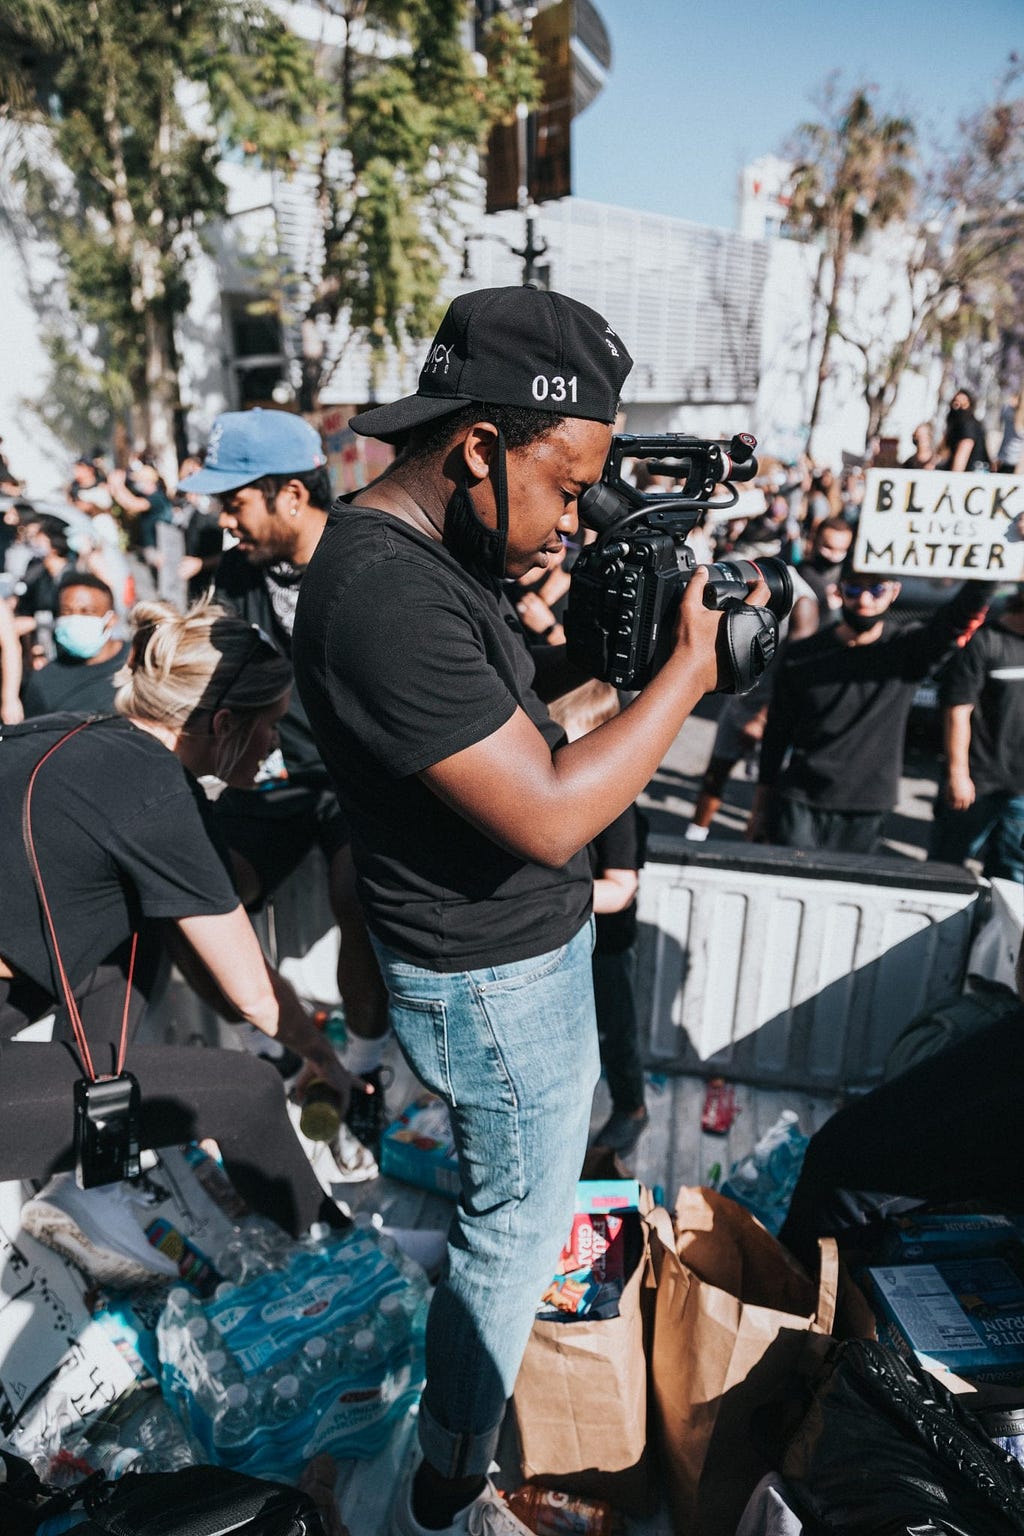 Image of a man taking pictures at a Black Lives Matter protest